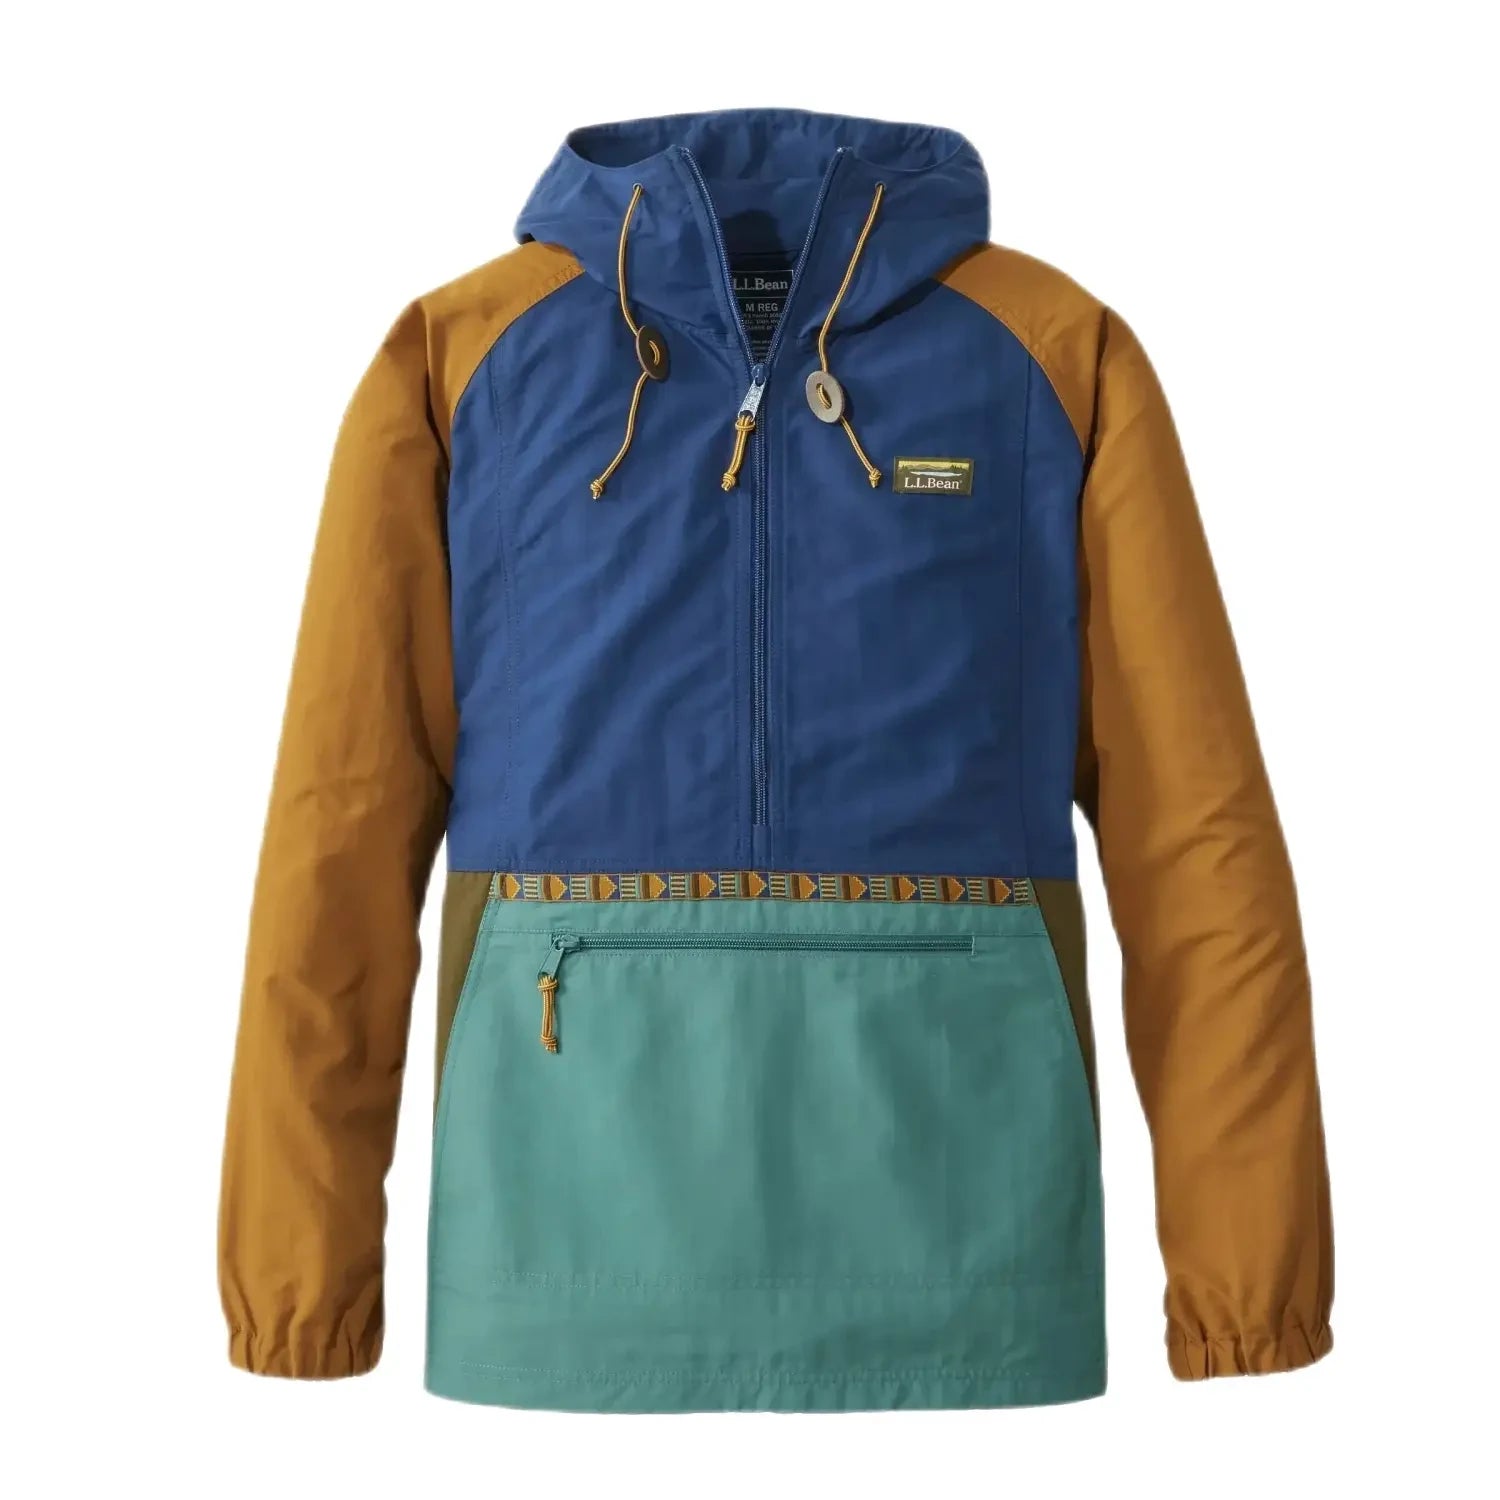 LL Bean Men's Mountain Classic Anorak shown in the Collegiate Blue/Rustic Green color option, front view.